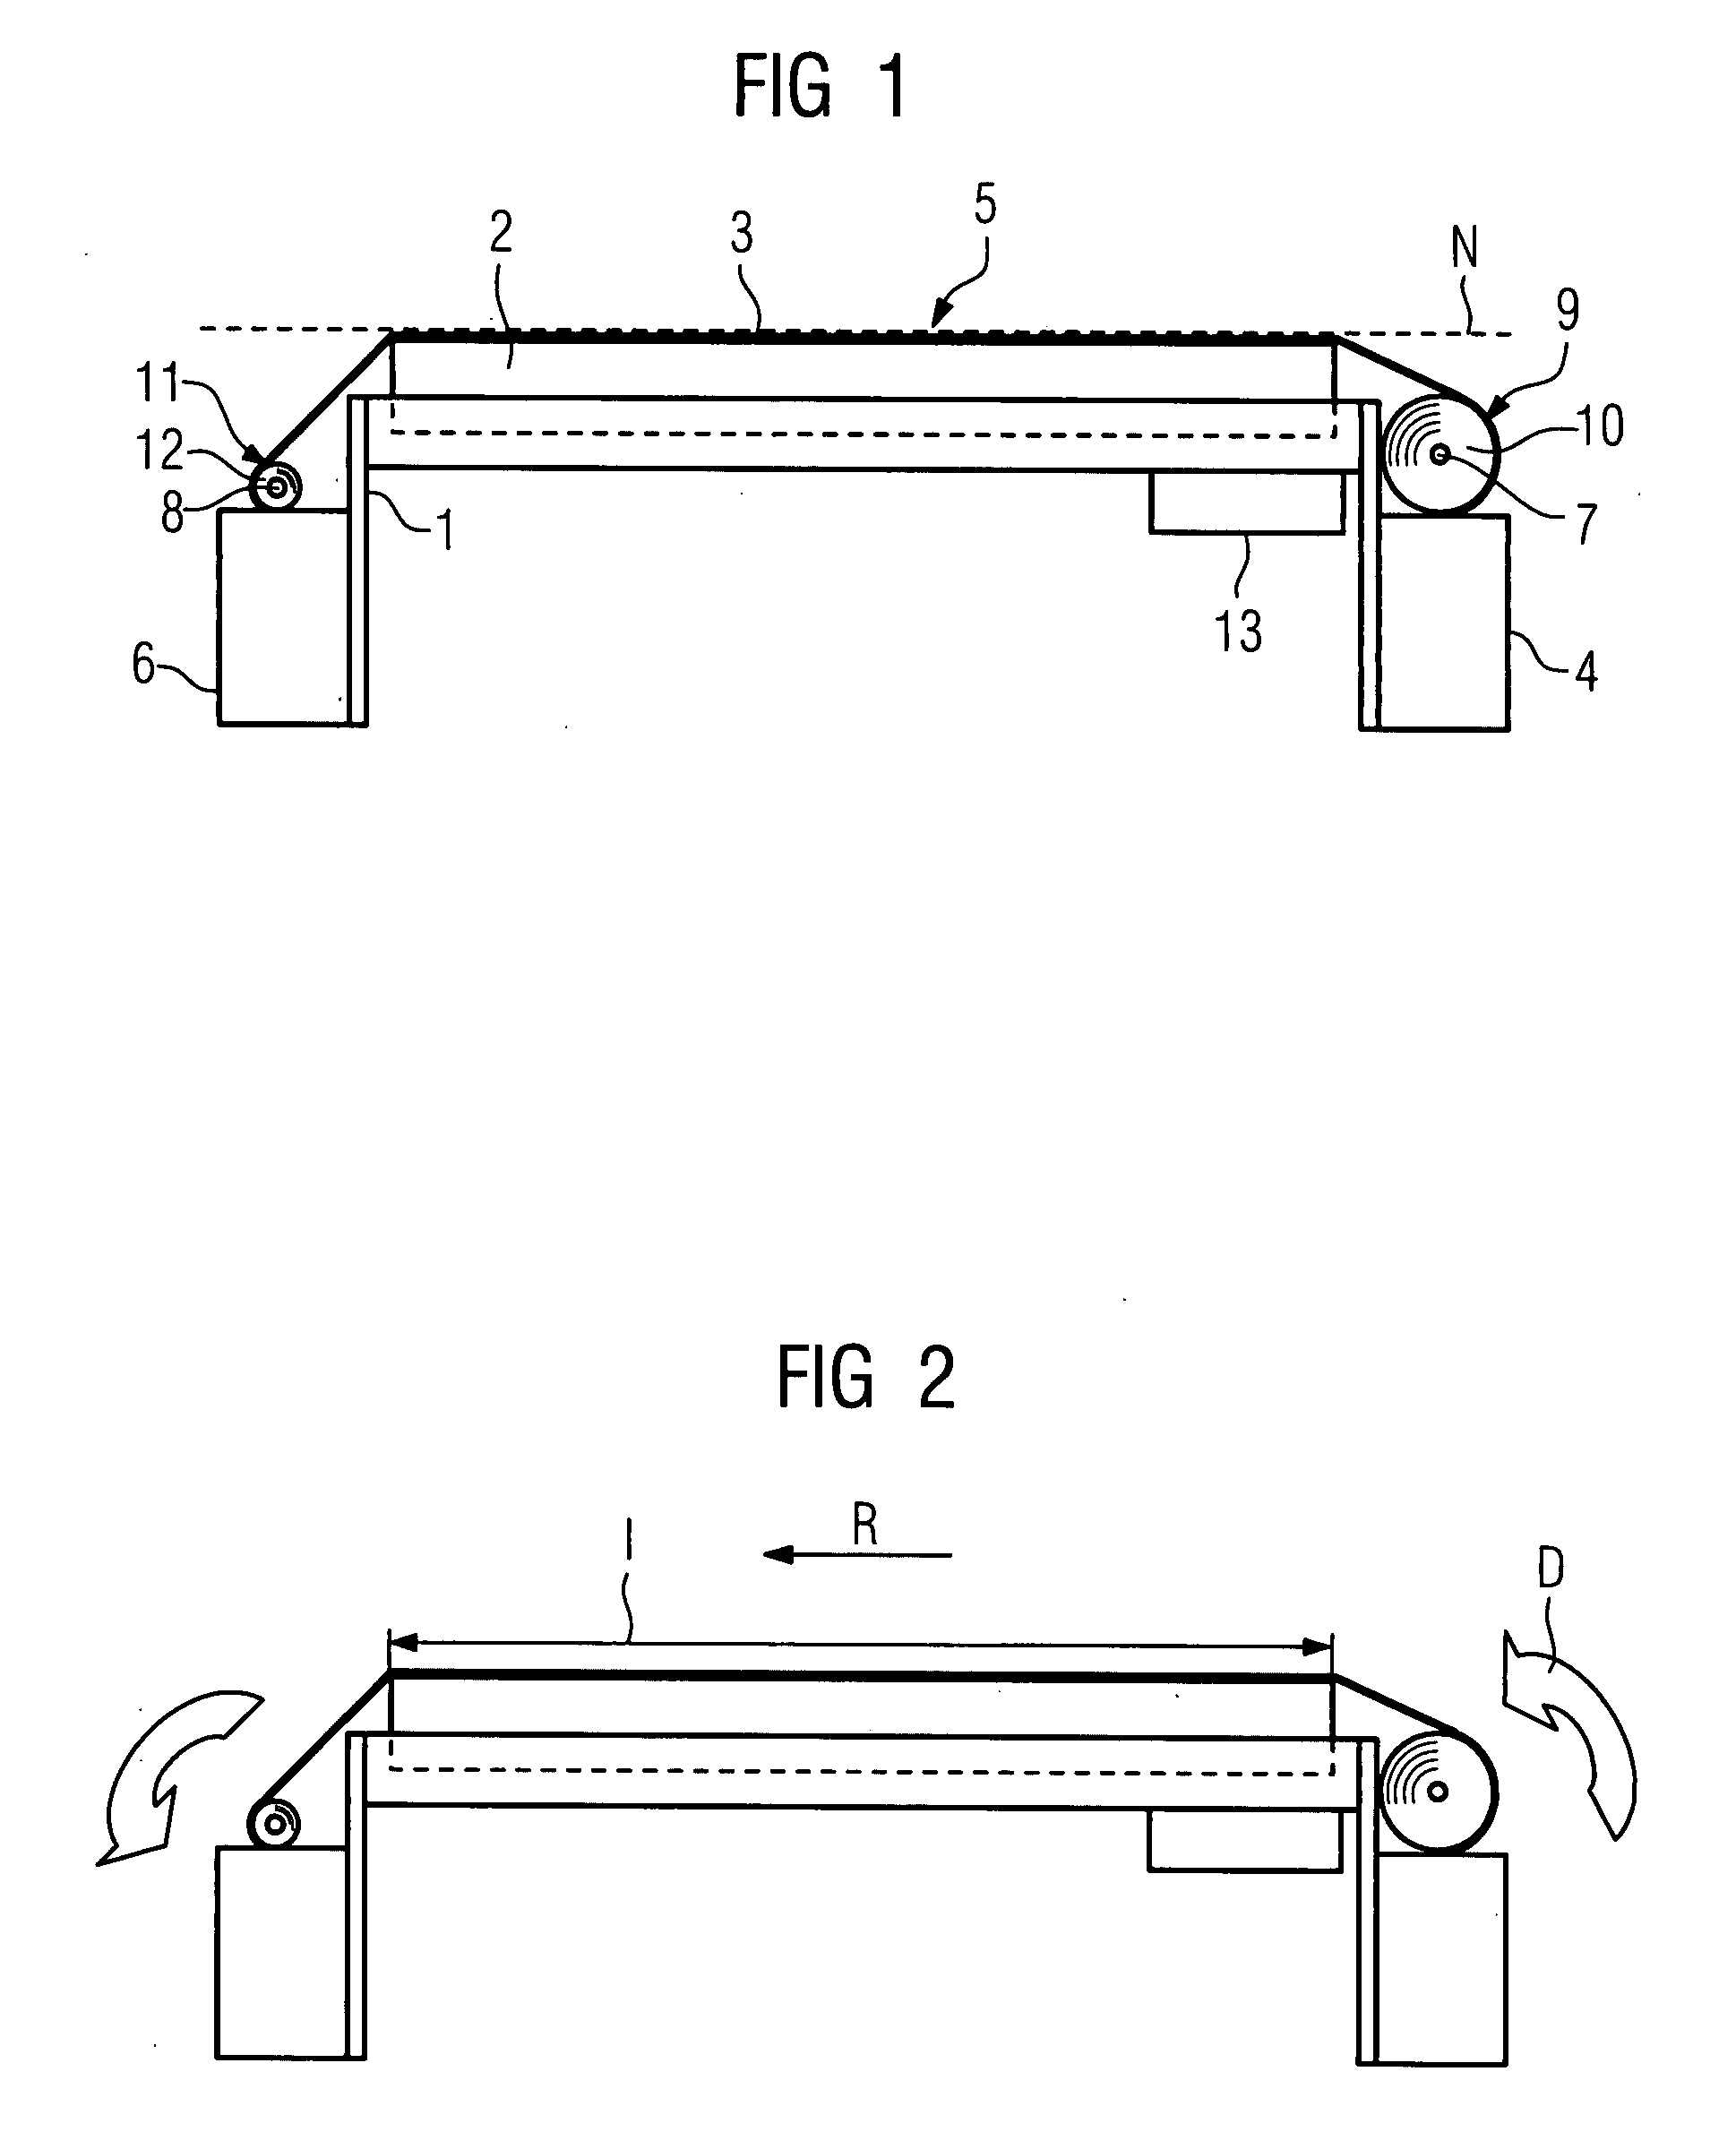 Apparatus for convering a support surface